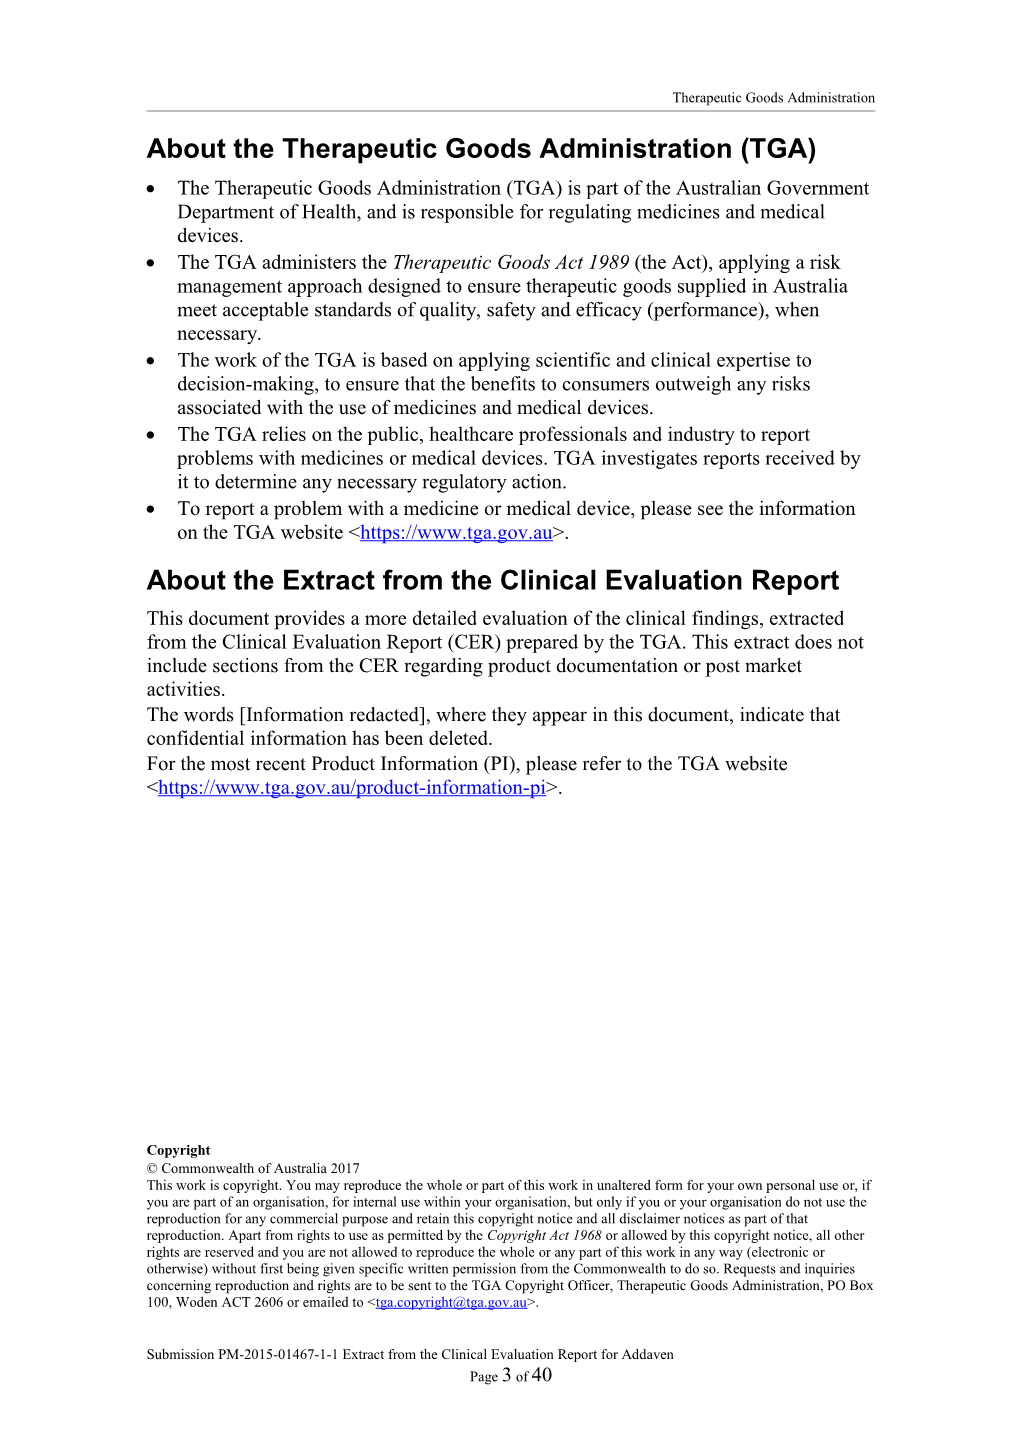 Attachment: Extract from Clinical Evaluation Report: Nine Trace Elements Including Chromic